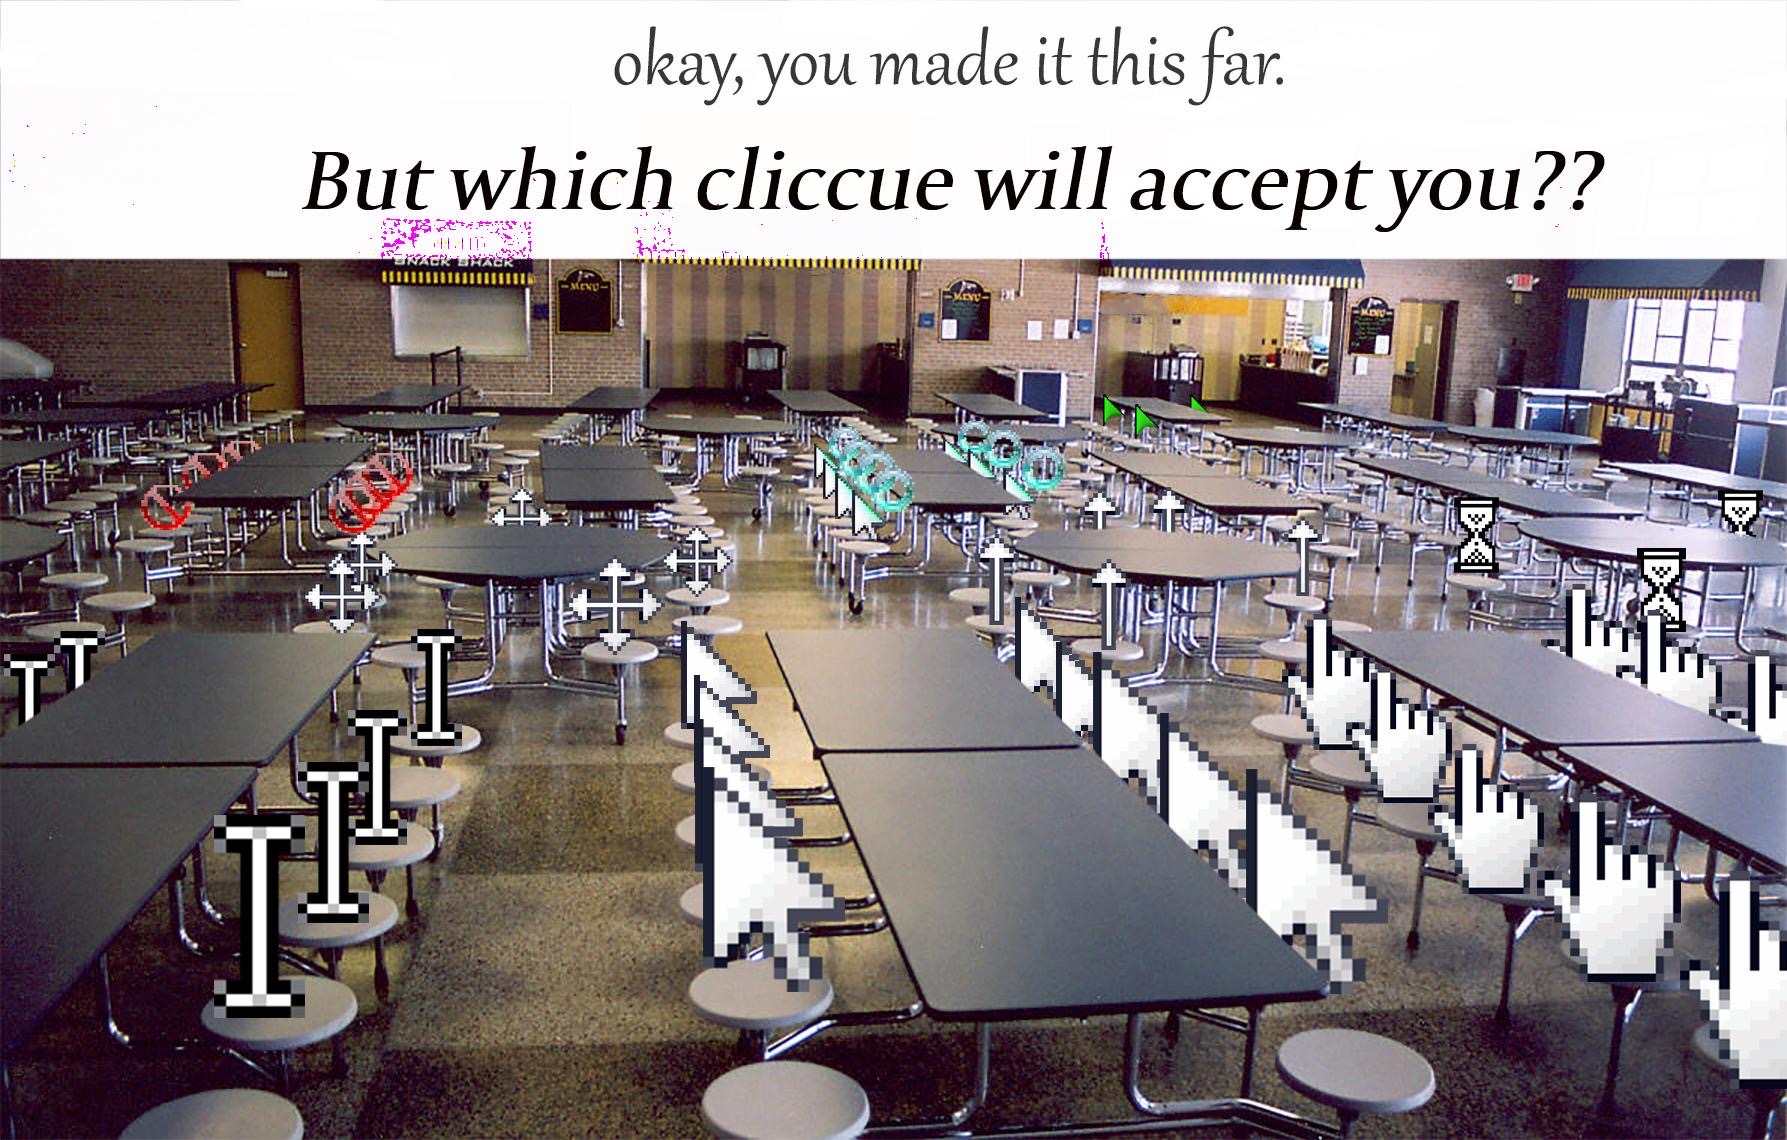 cafeteria - okay, you made it this far. But which cliccue will accept you??